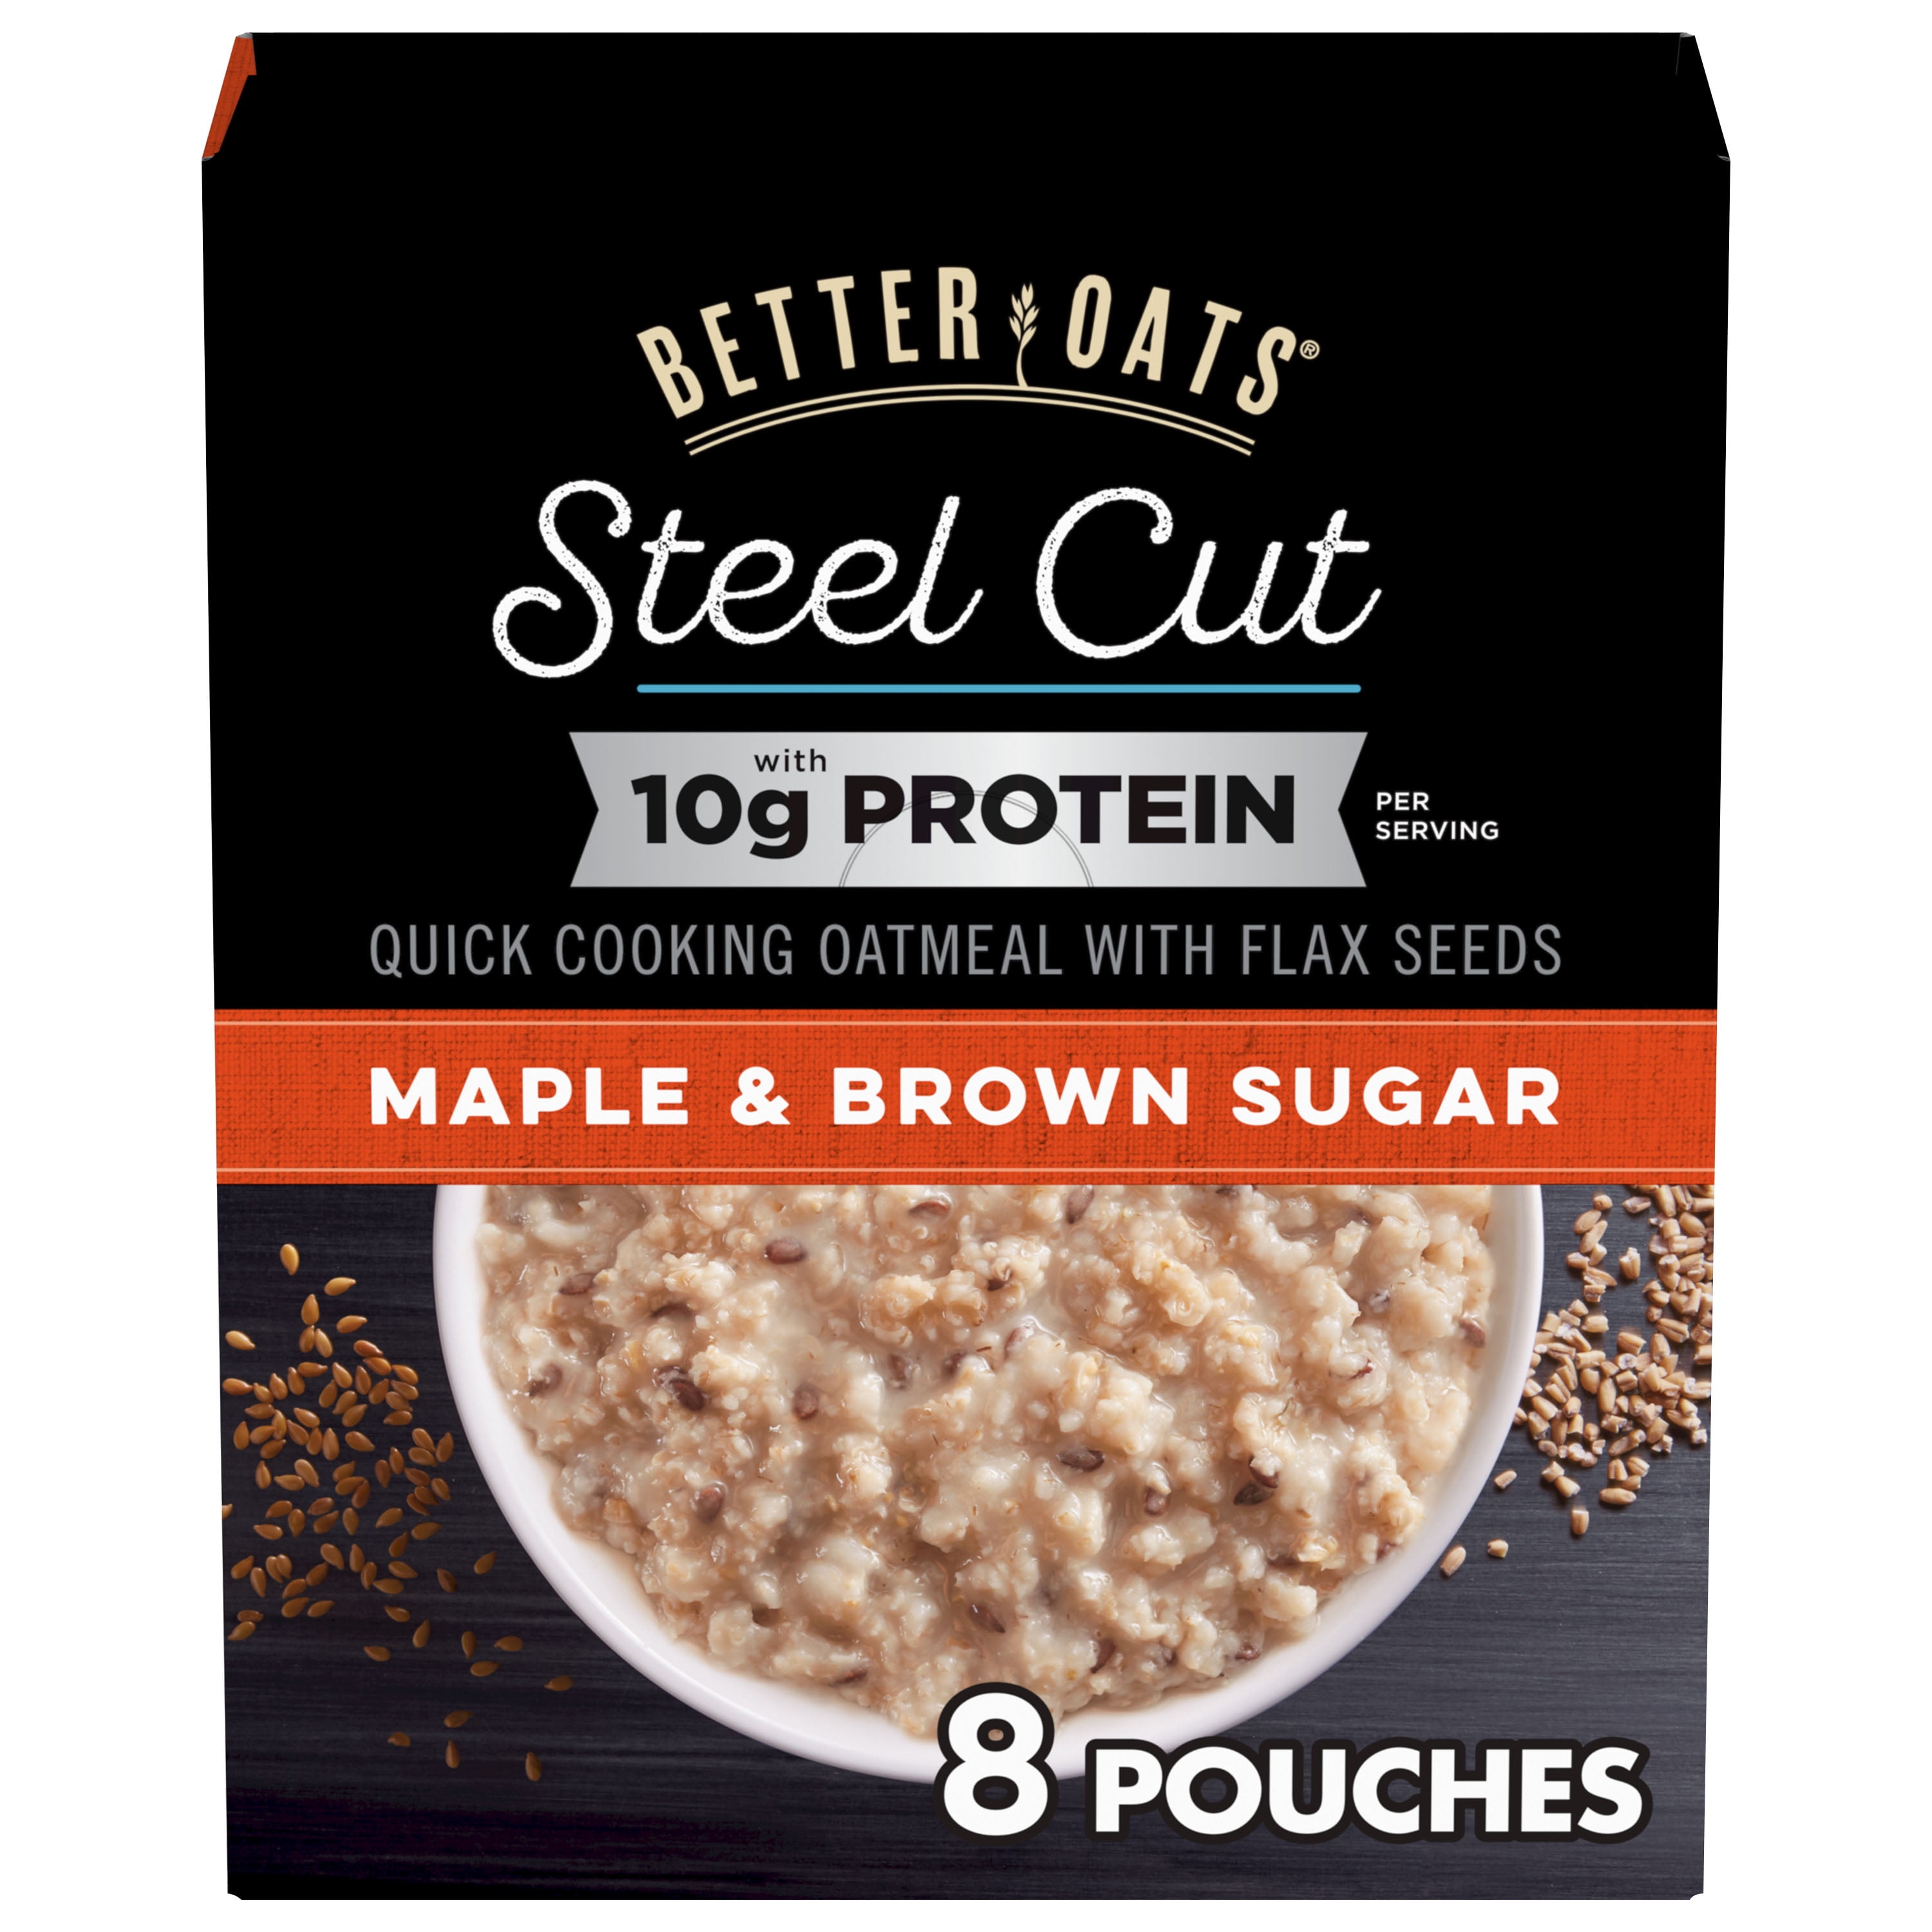  Better Oats Steel Cut Maple Brown Sugar Instant Oatmeal with  Flax 15.1 oz. Box (01791) : Grocery & Gourmet Food